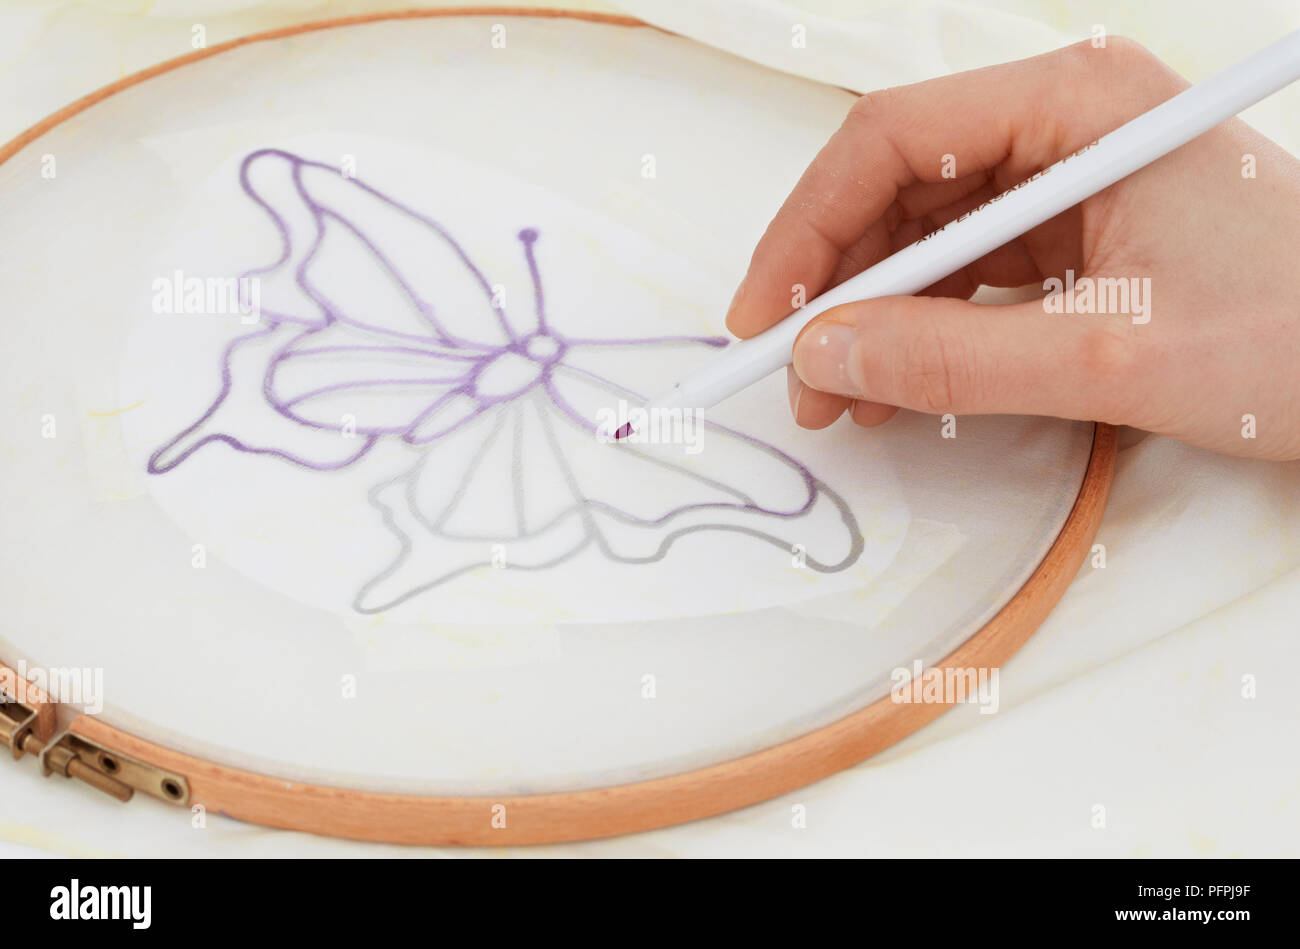 Tracing over lines of butterfly motif on silk scarf secured to embroidery hoop, close-up Stock Photo